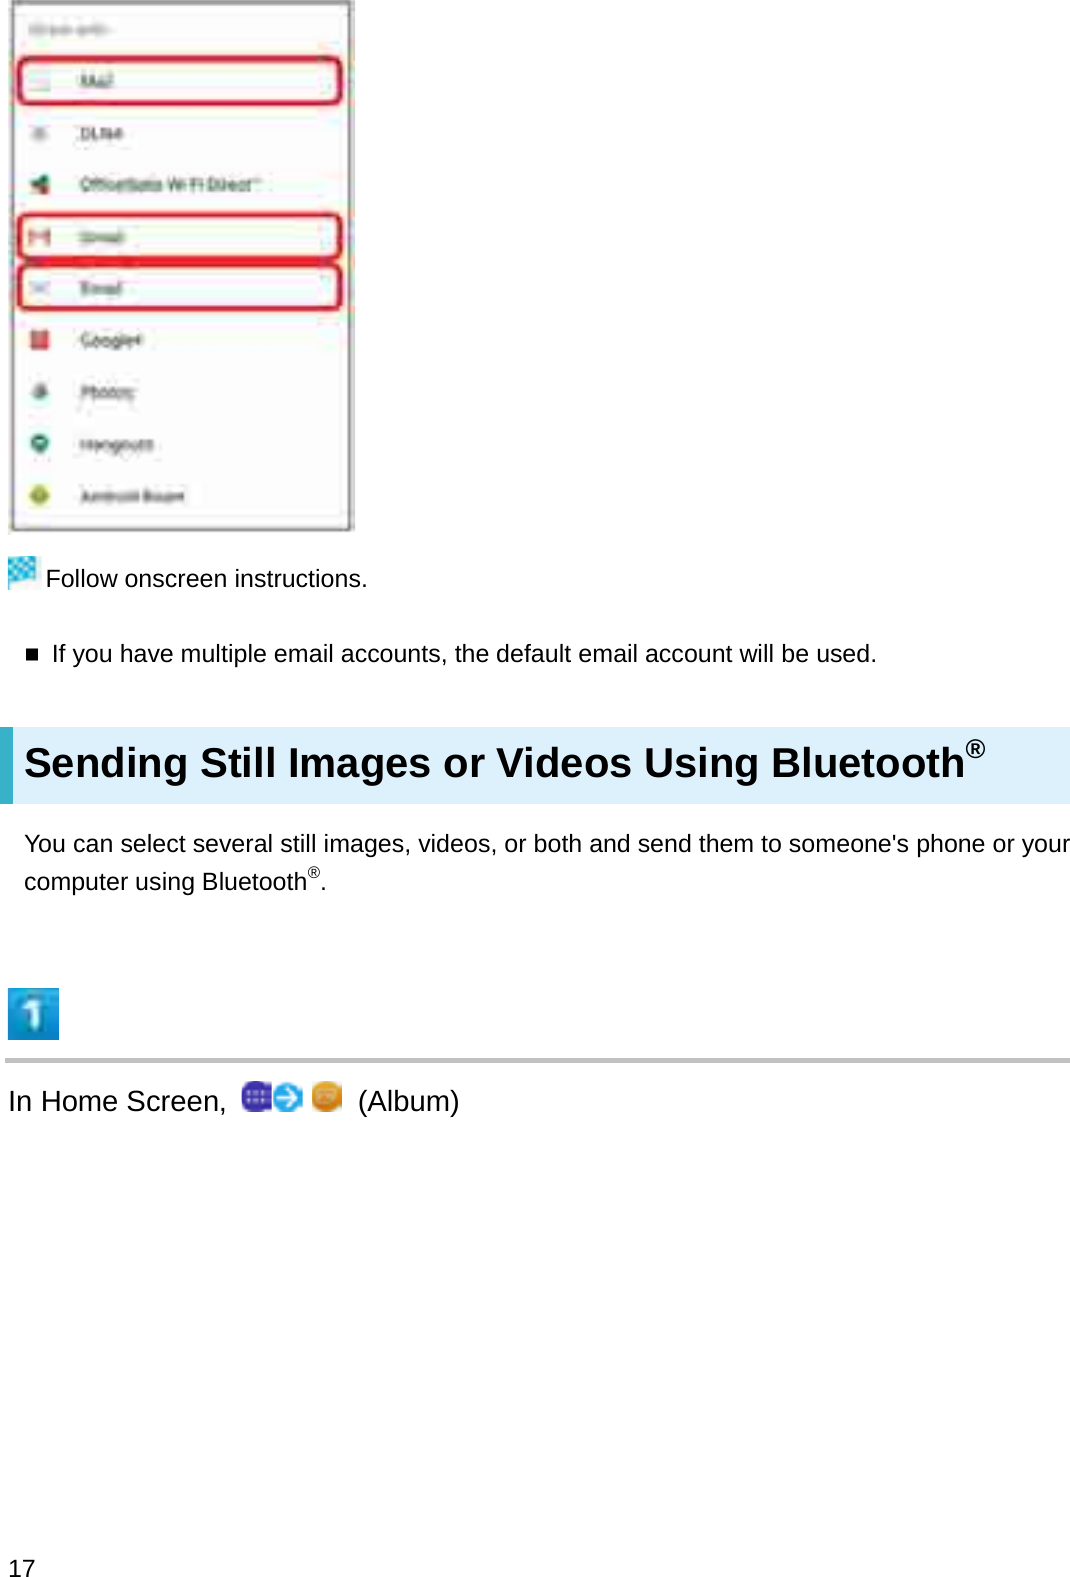 Follow onscreen instructions.If you have multiple email accounts, the default email account will be used.Sending Still Images or Videos Using Bluetooth®You can select several still images, videos, or both and send them to someone&apos;s phone or your computer using Bluetooth®.In Home Screen,  (Album)17